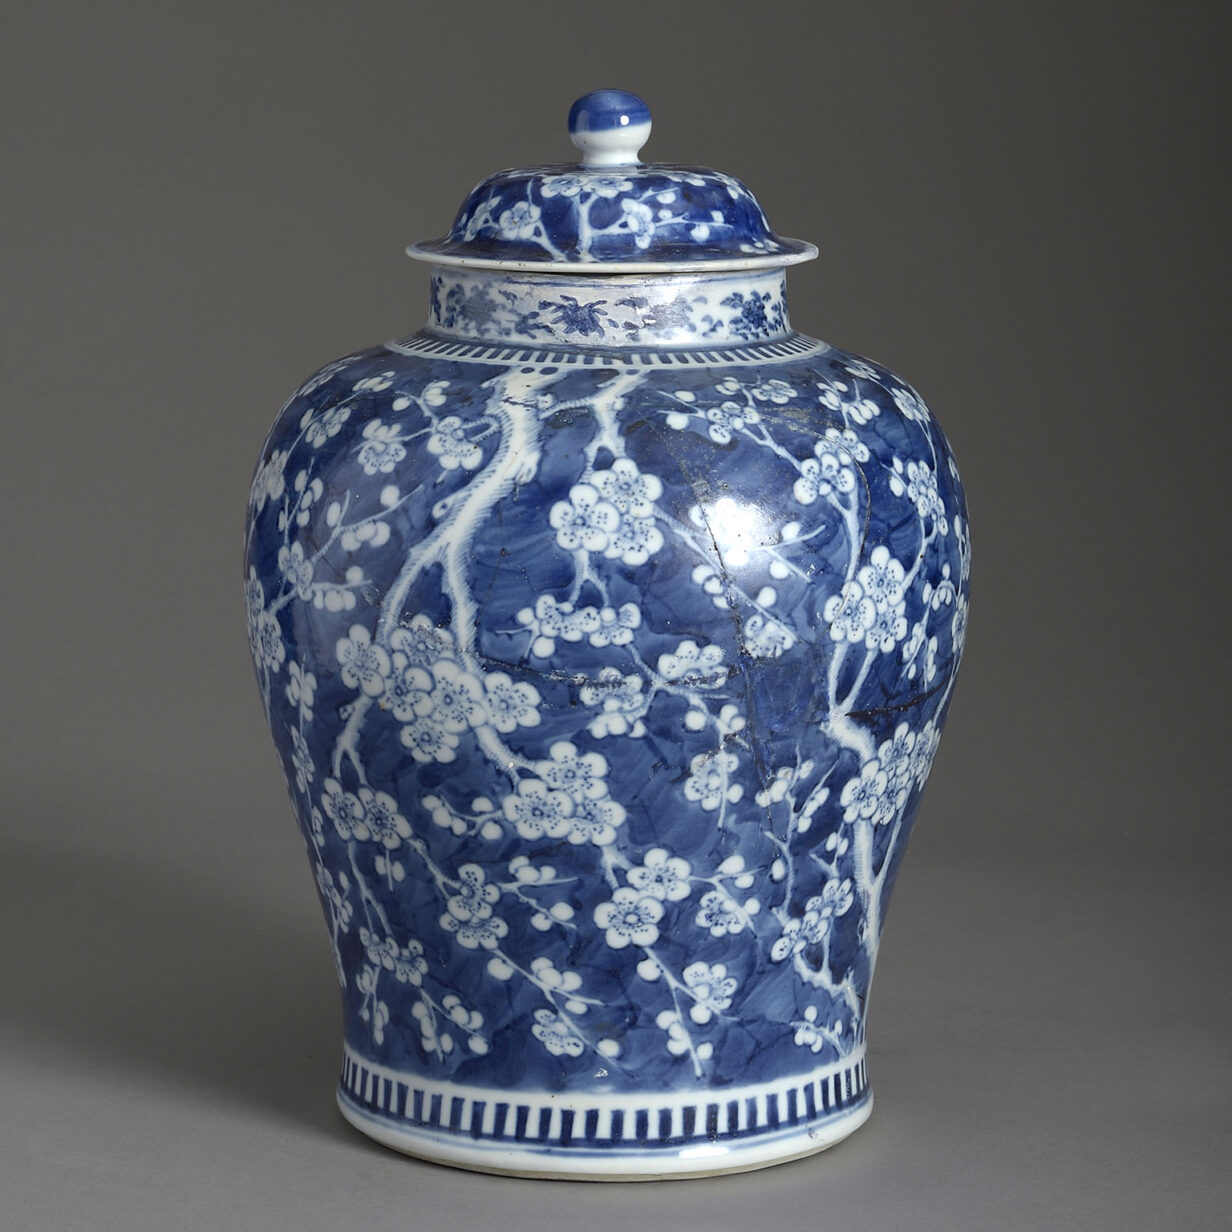 19th century blue and white porcelain vase and cover